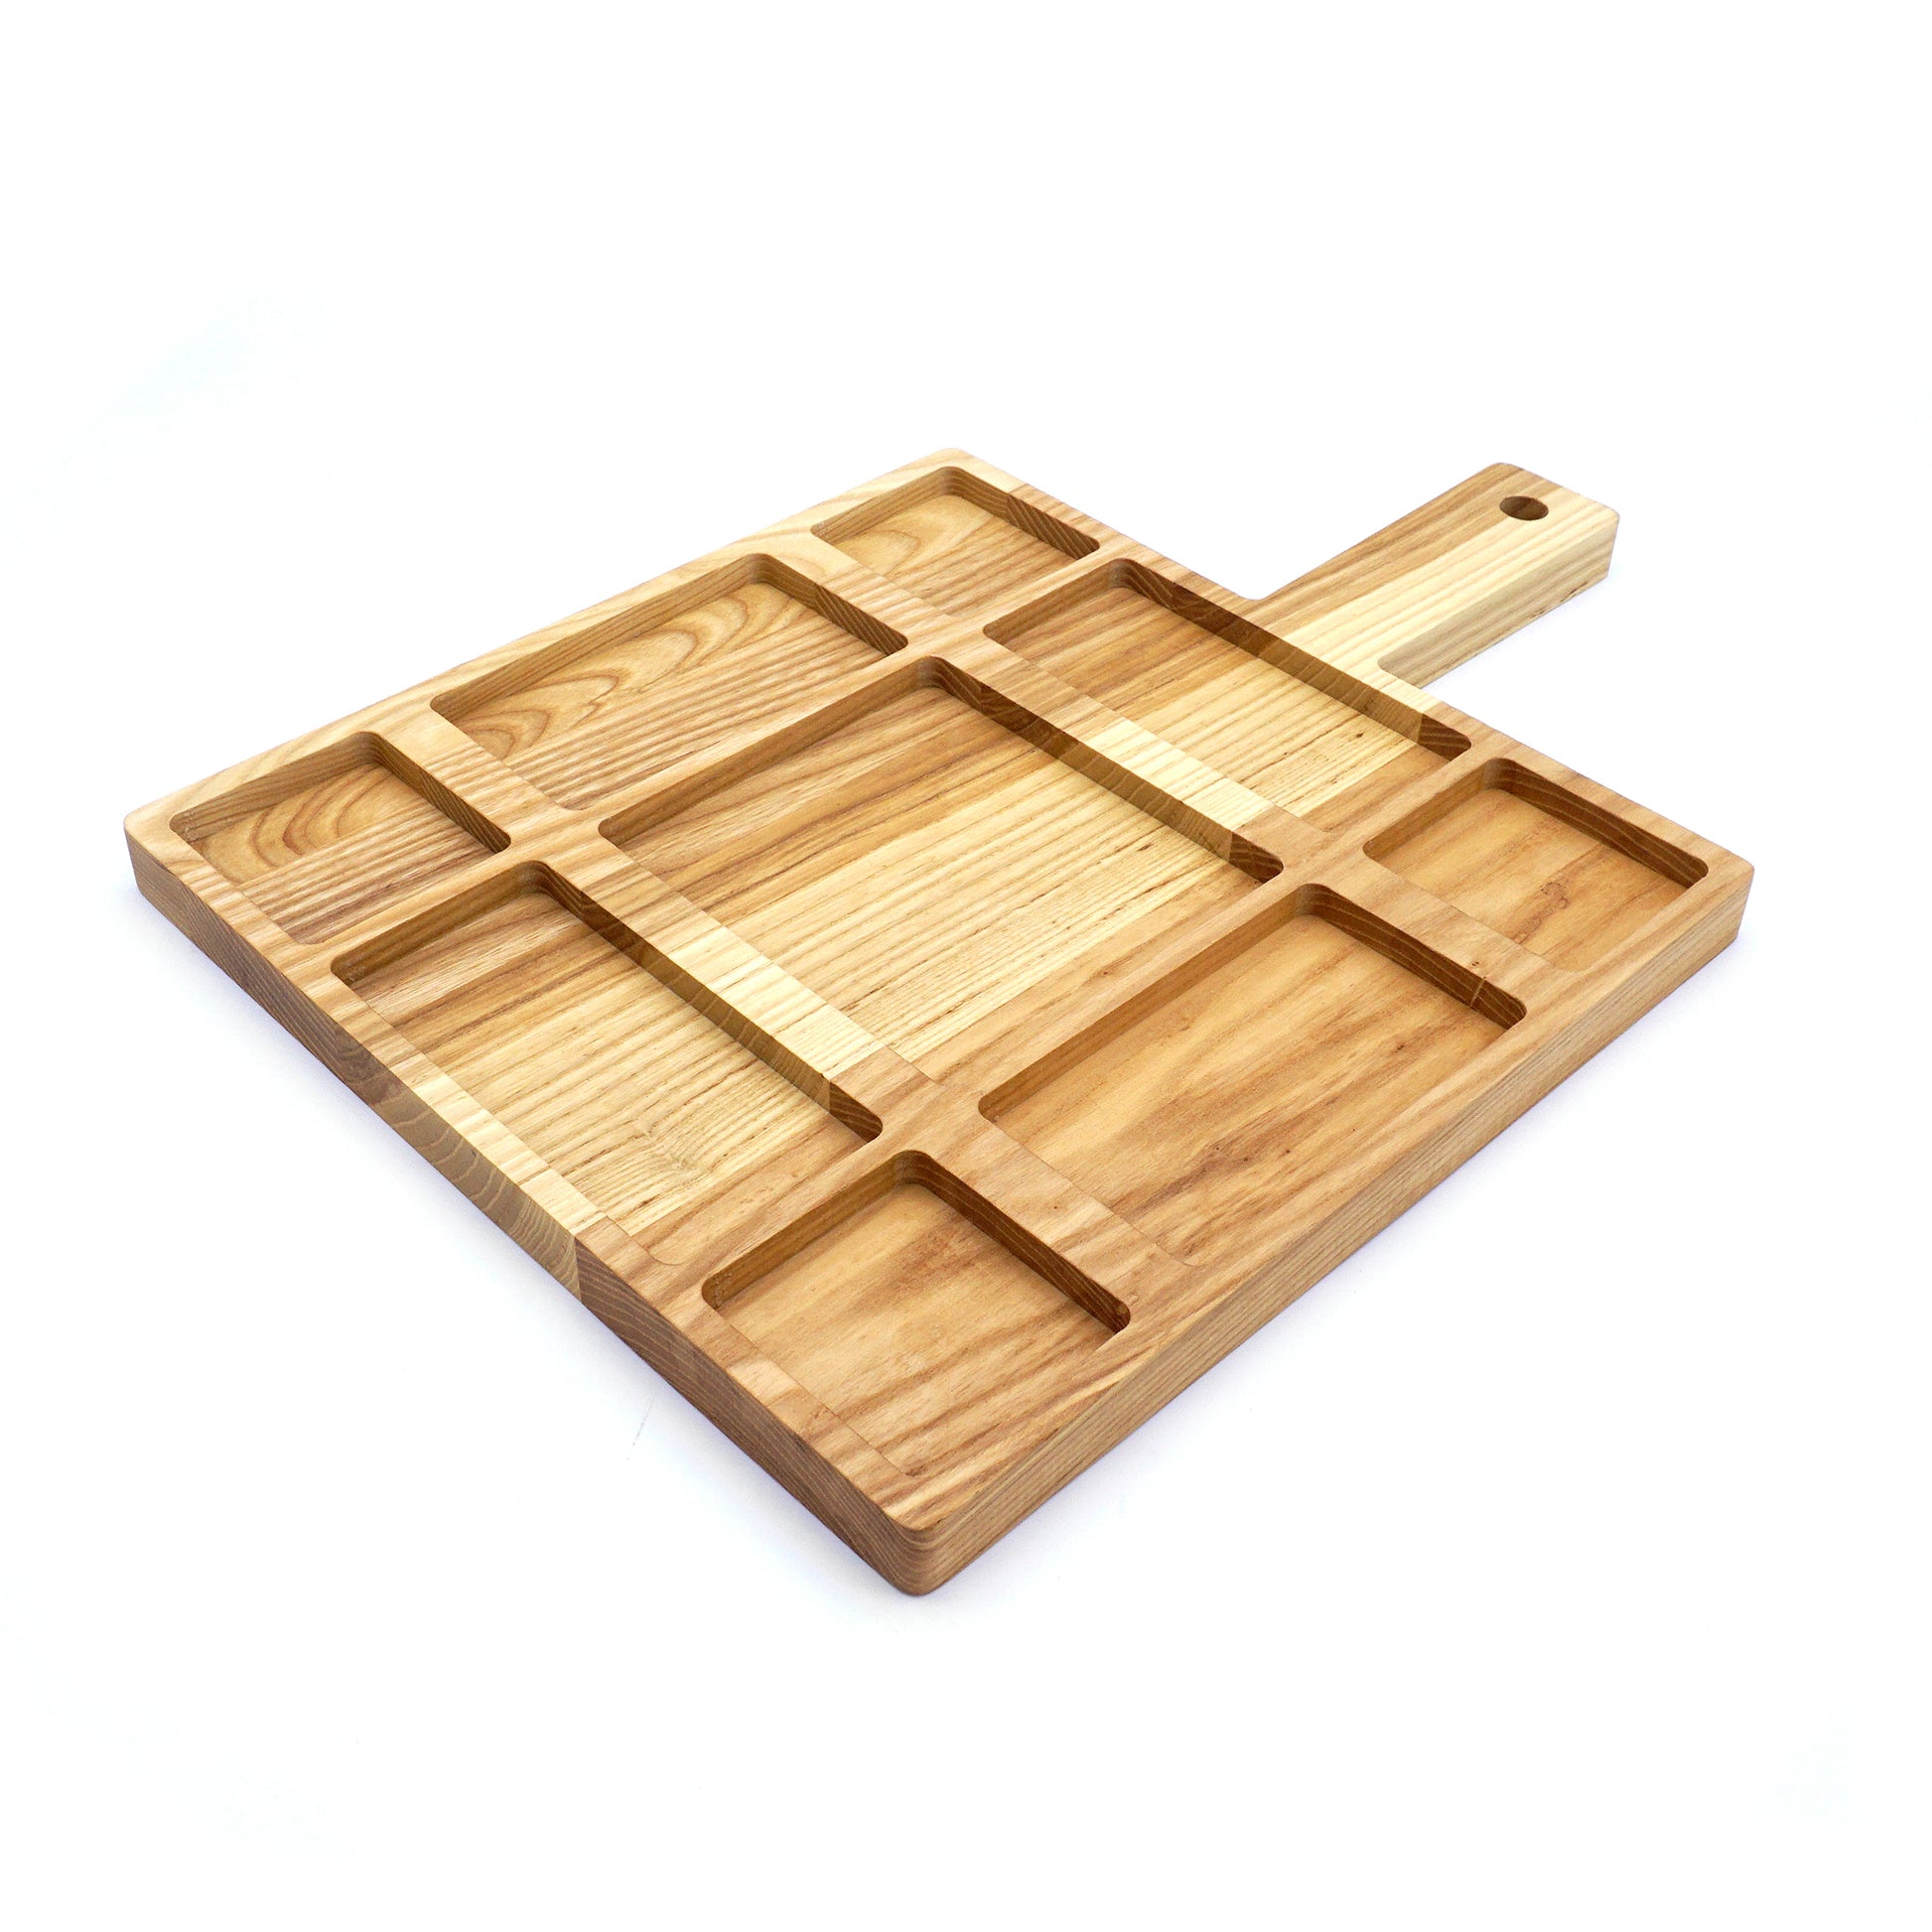 JK Adams Ash Divided Serving Board flat and on an angle.